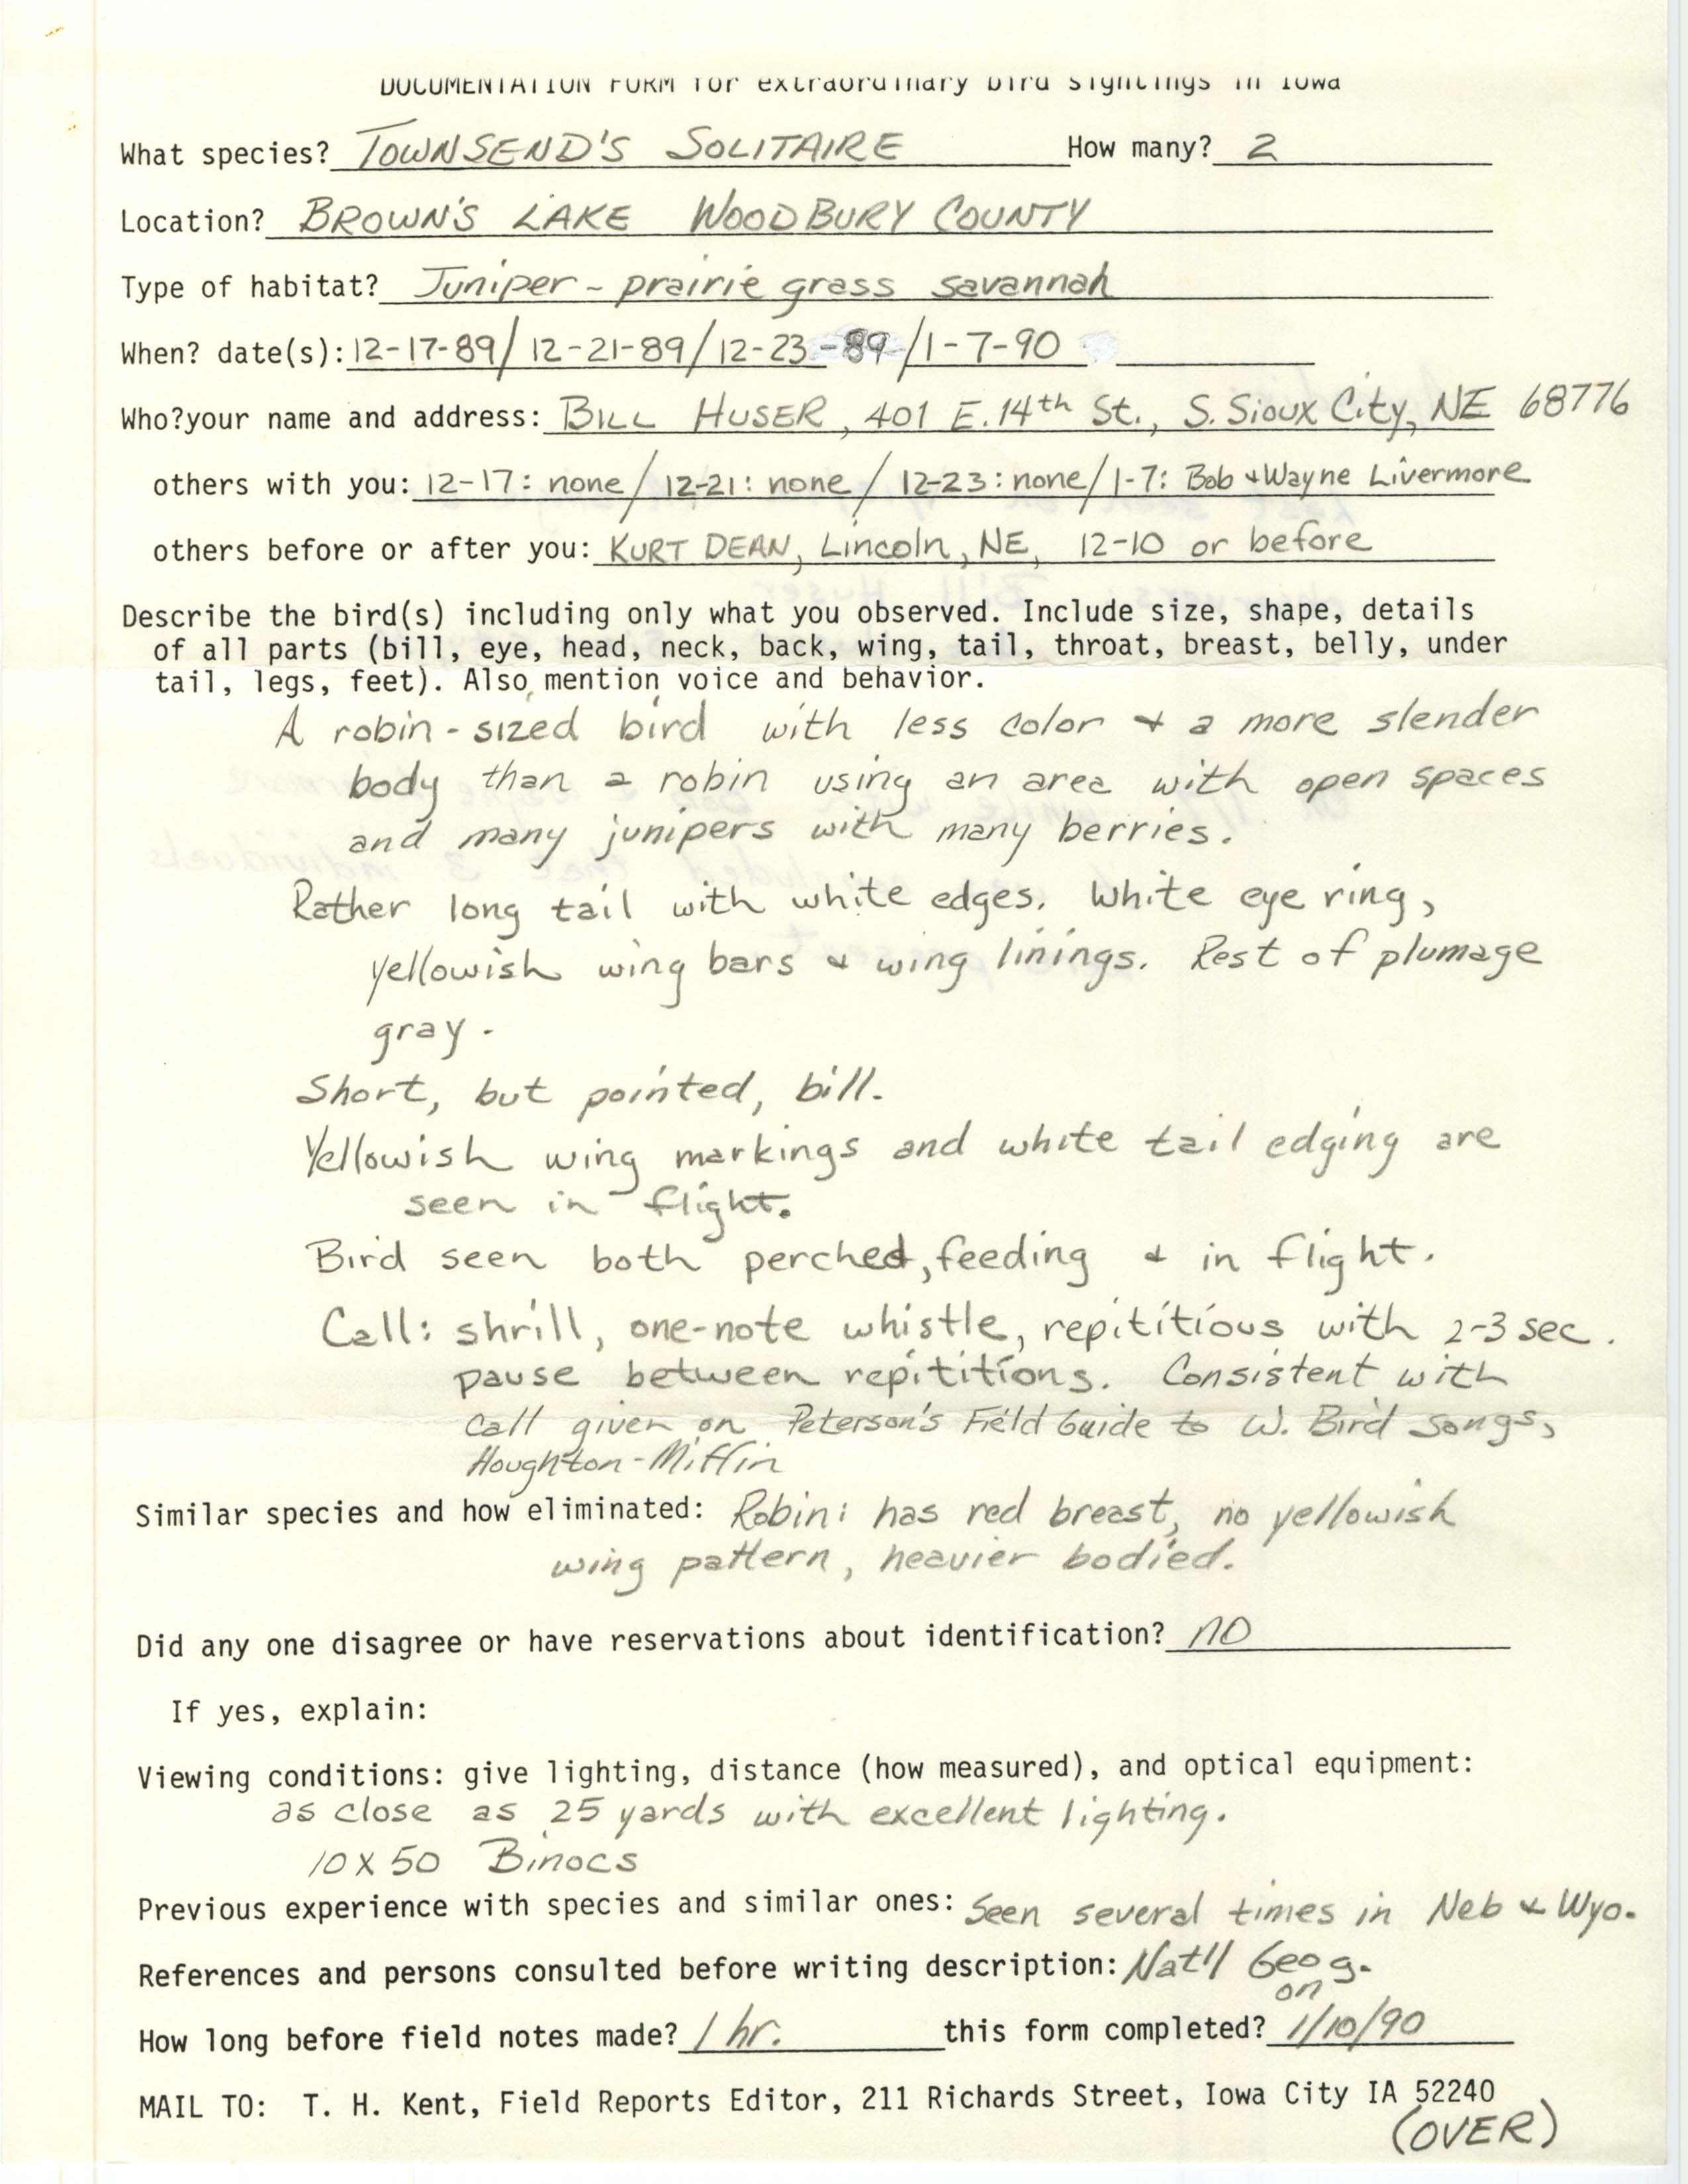 Rare bird documentation form for Townsend's Solitaire at Brown's Lake in Woodbury County in 1989 and 1990